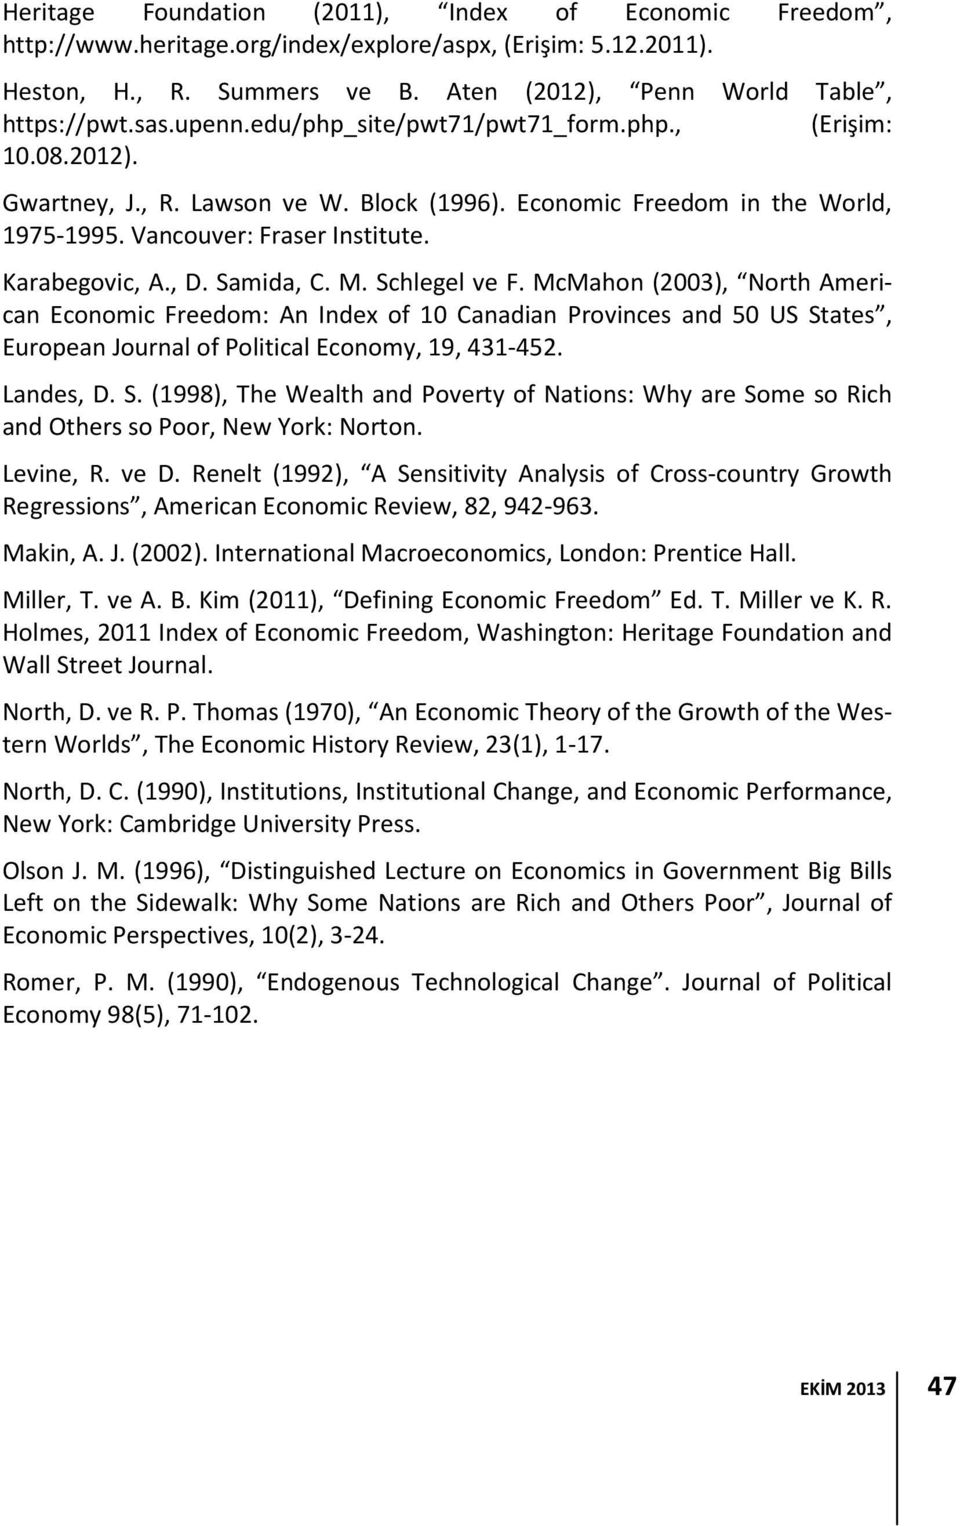 Samida, C. M. Schlegel ve F. McMahon (2003), North American Economic Freedom: An Index of 10 Canadian Provinces and 50 US States, European Journal of Political Economy, 19, 431-452. Landes, D. S. (1998), The Wealth and Poverty of Nations: Why are Some so Rich and Others so Poor, New York: Norton.